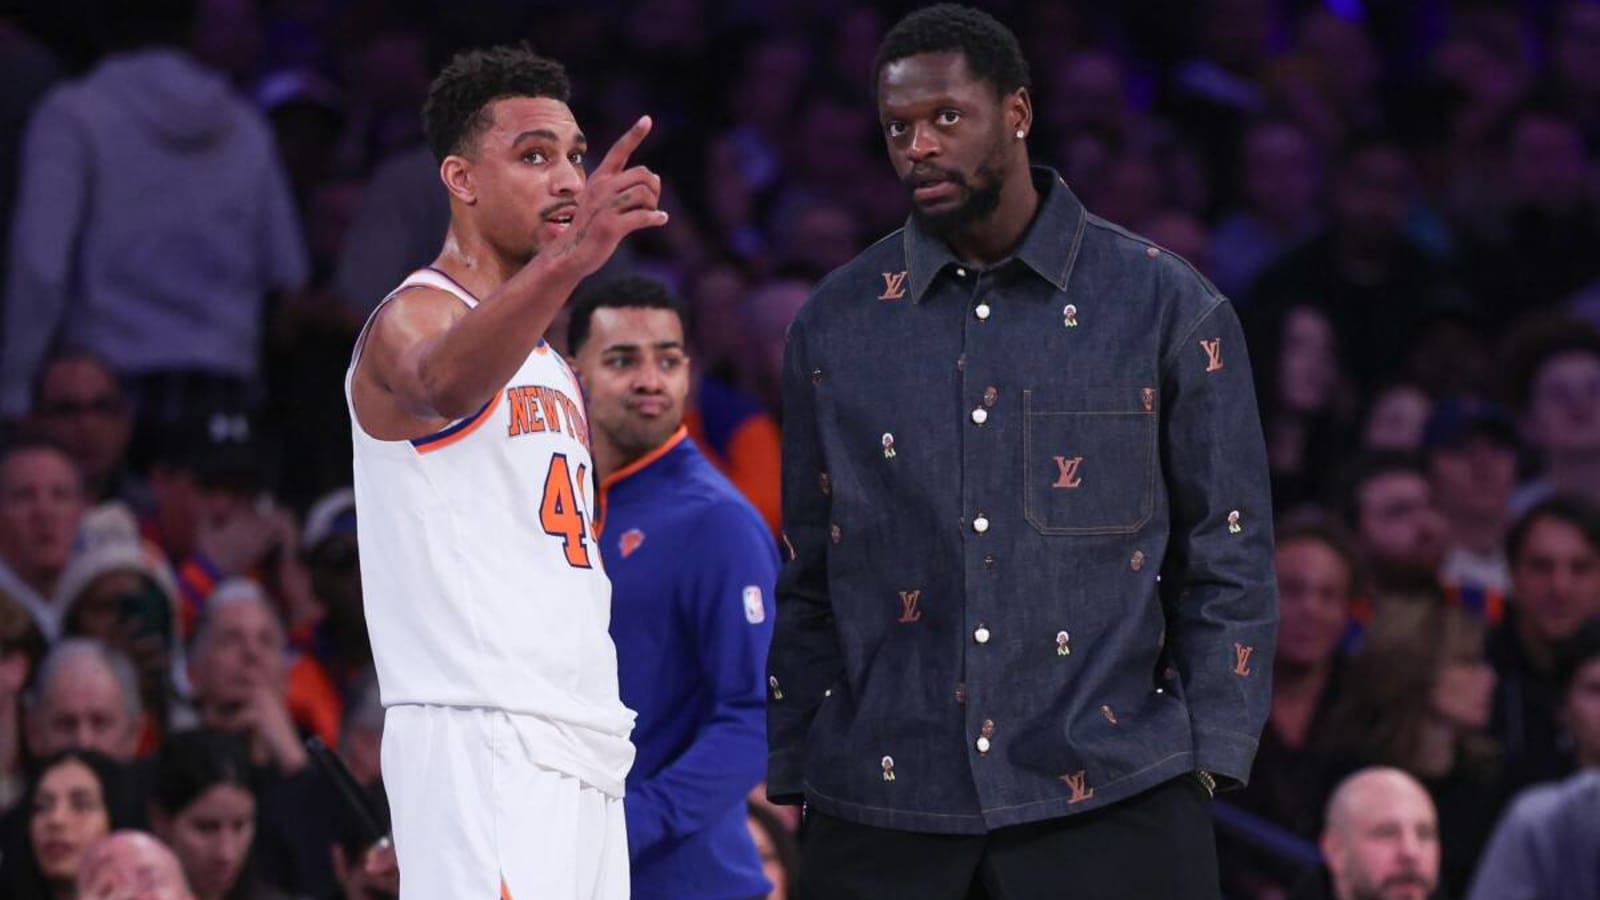 Shams Charania Says Teams Are ‘Monitoring’ Julius Randle’s Situation With The Knicks